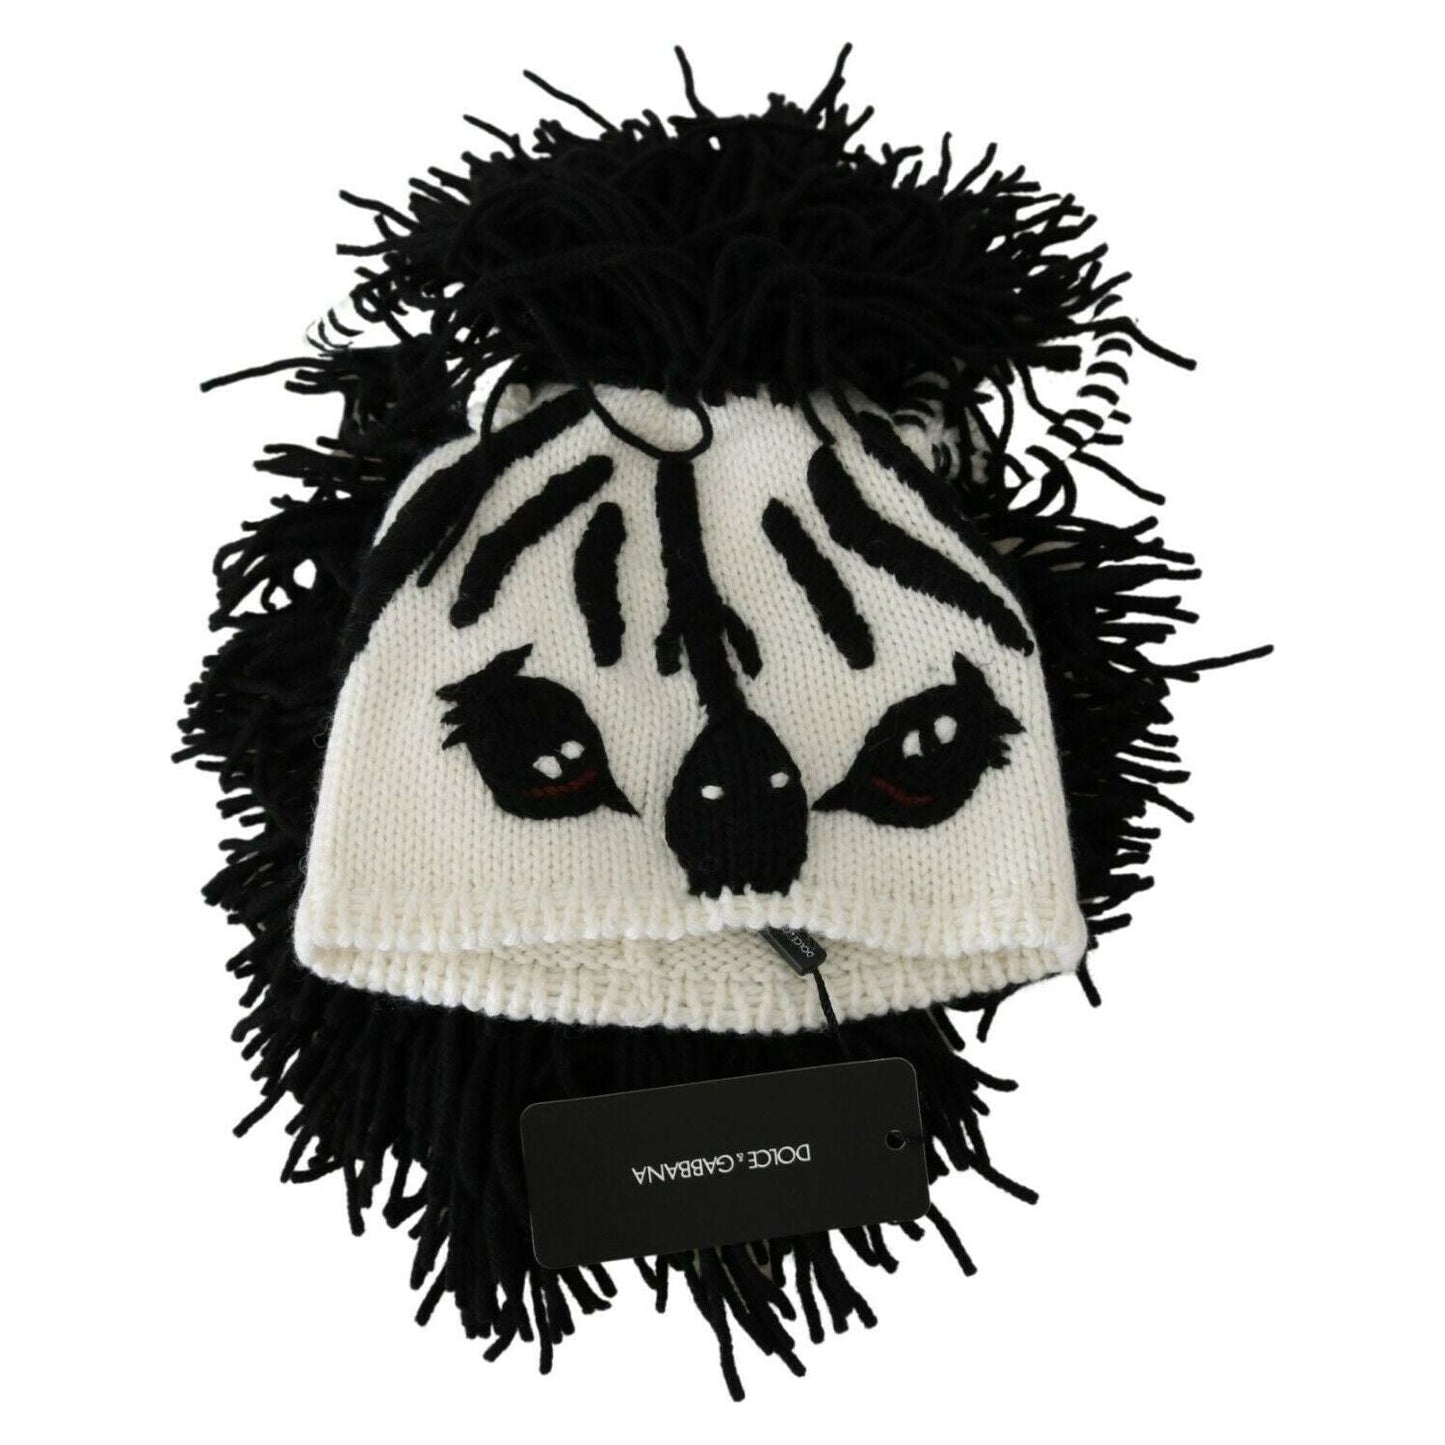 Dolce & Gabbana Black and White Knitted Cashmere Beanie black-white-knitted-cashmere-animal-design-hat WOMAN HATS s-l1600-43-d02e9ce9-55d_550a2453-27b1-4ad0-9e92-efec334e494d.jpg